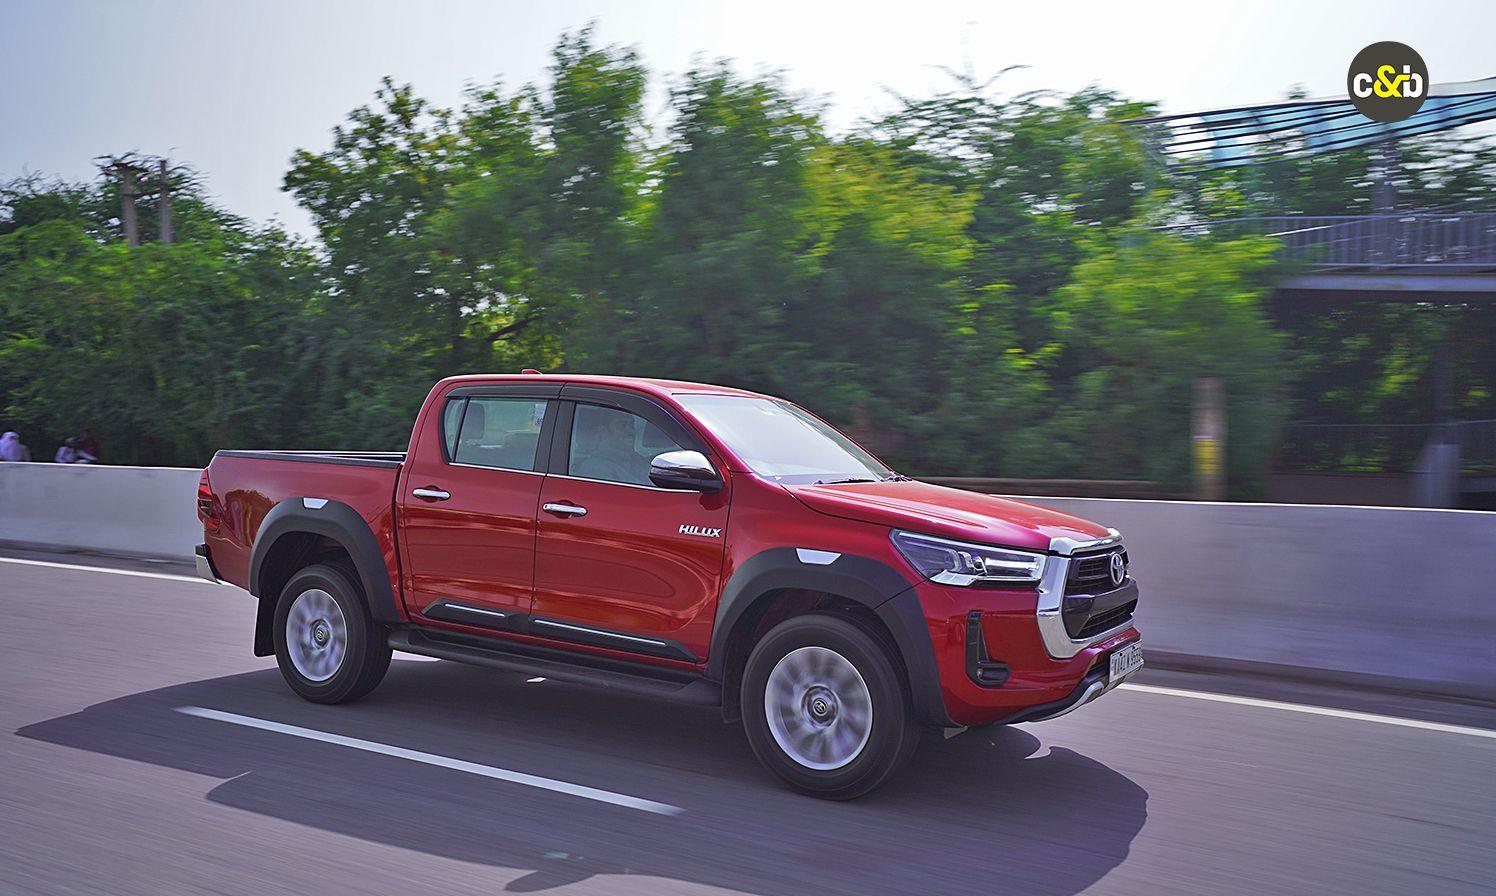 Toyota Hilux Review: Tested For Practicality And Utility